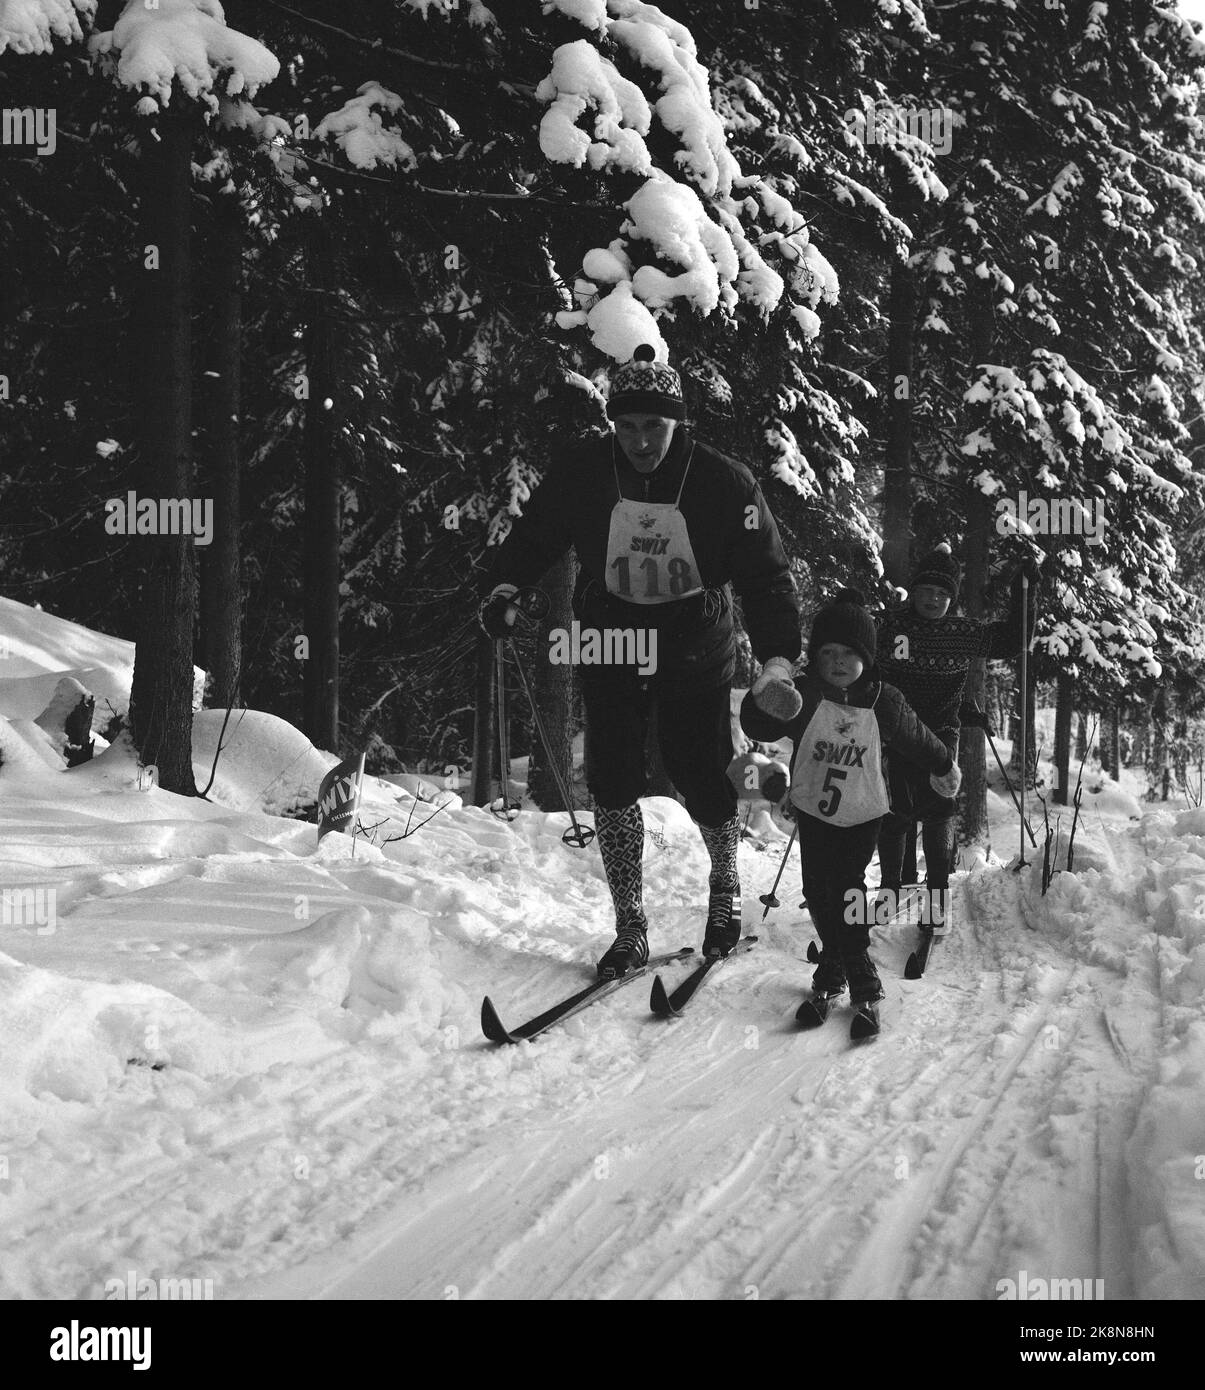 Oslo January 21, 1967. Ski runners from the decided world -elite showed up at the starting line when a housing cooperative on the outskirts of Oslo arranged ski runs for the youngest - in a collaboration with the picture magazine Current. Here, Sverre Bakke, four years, who chose to start without spells. He received a cautious guidance from cross -country coach Oddmund Jensen on the first stage, but when he first realized what it was all about, he was not to stop. Jensen cracked in total, and he was hopeless far after Sverre went over goals in fine form. Photo: Ivar Aaserud / Current / NTB Stock Photo